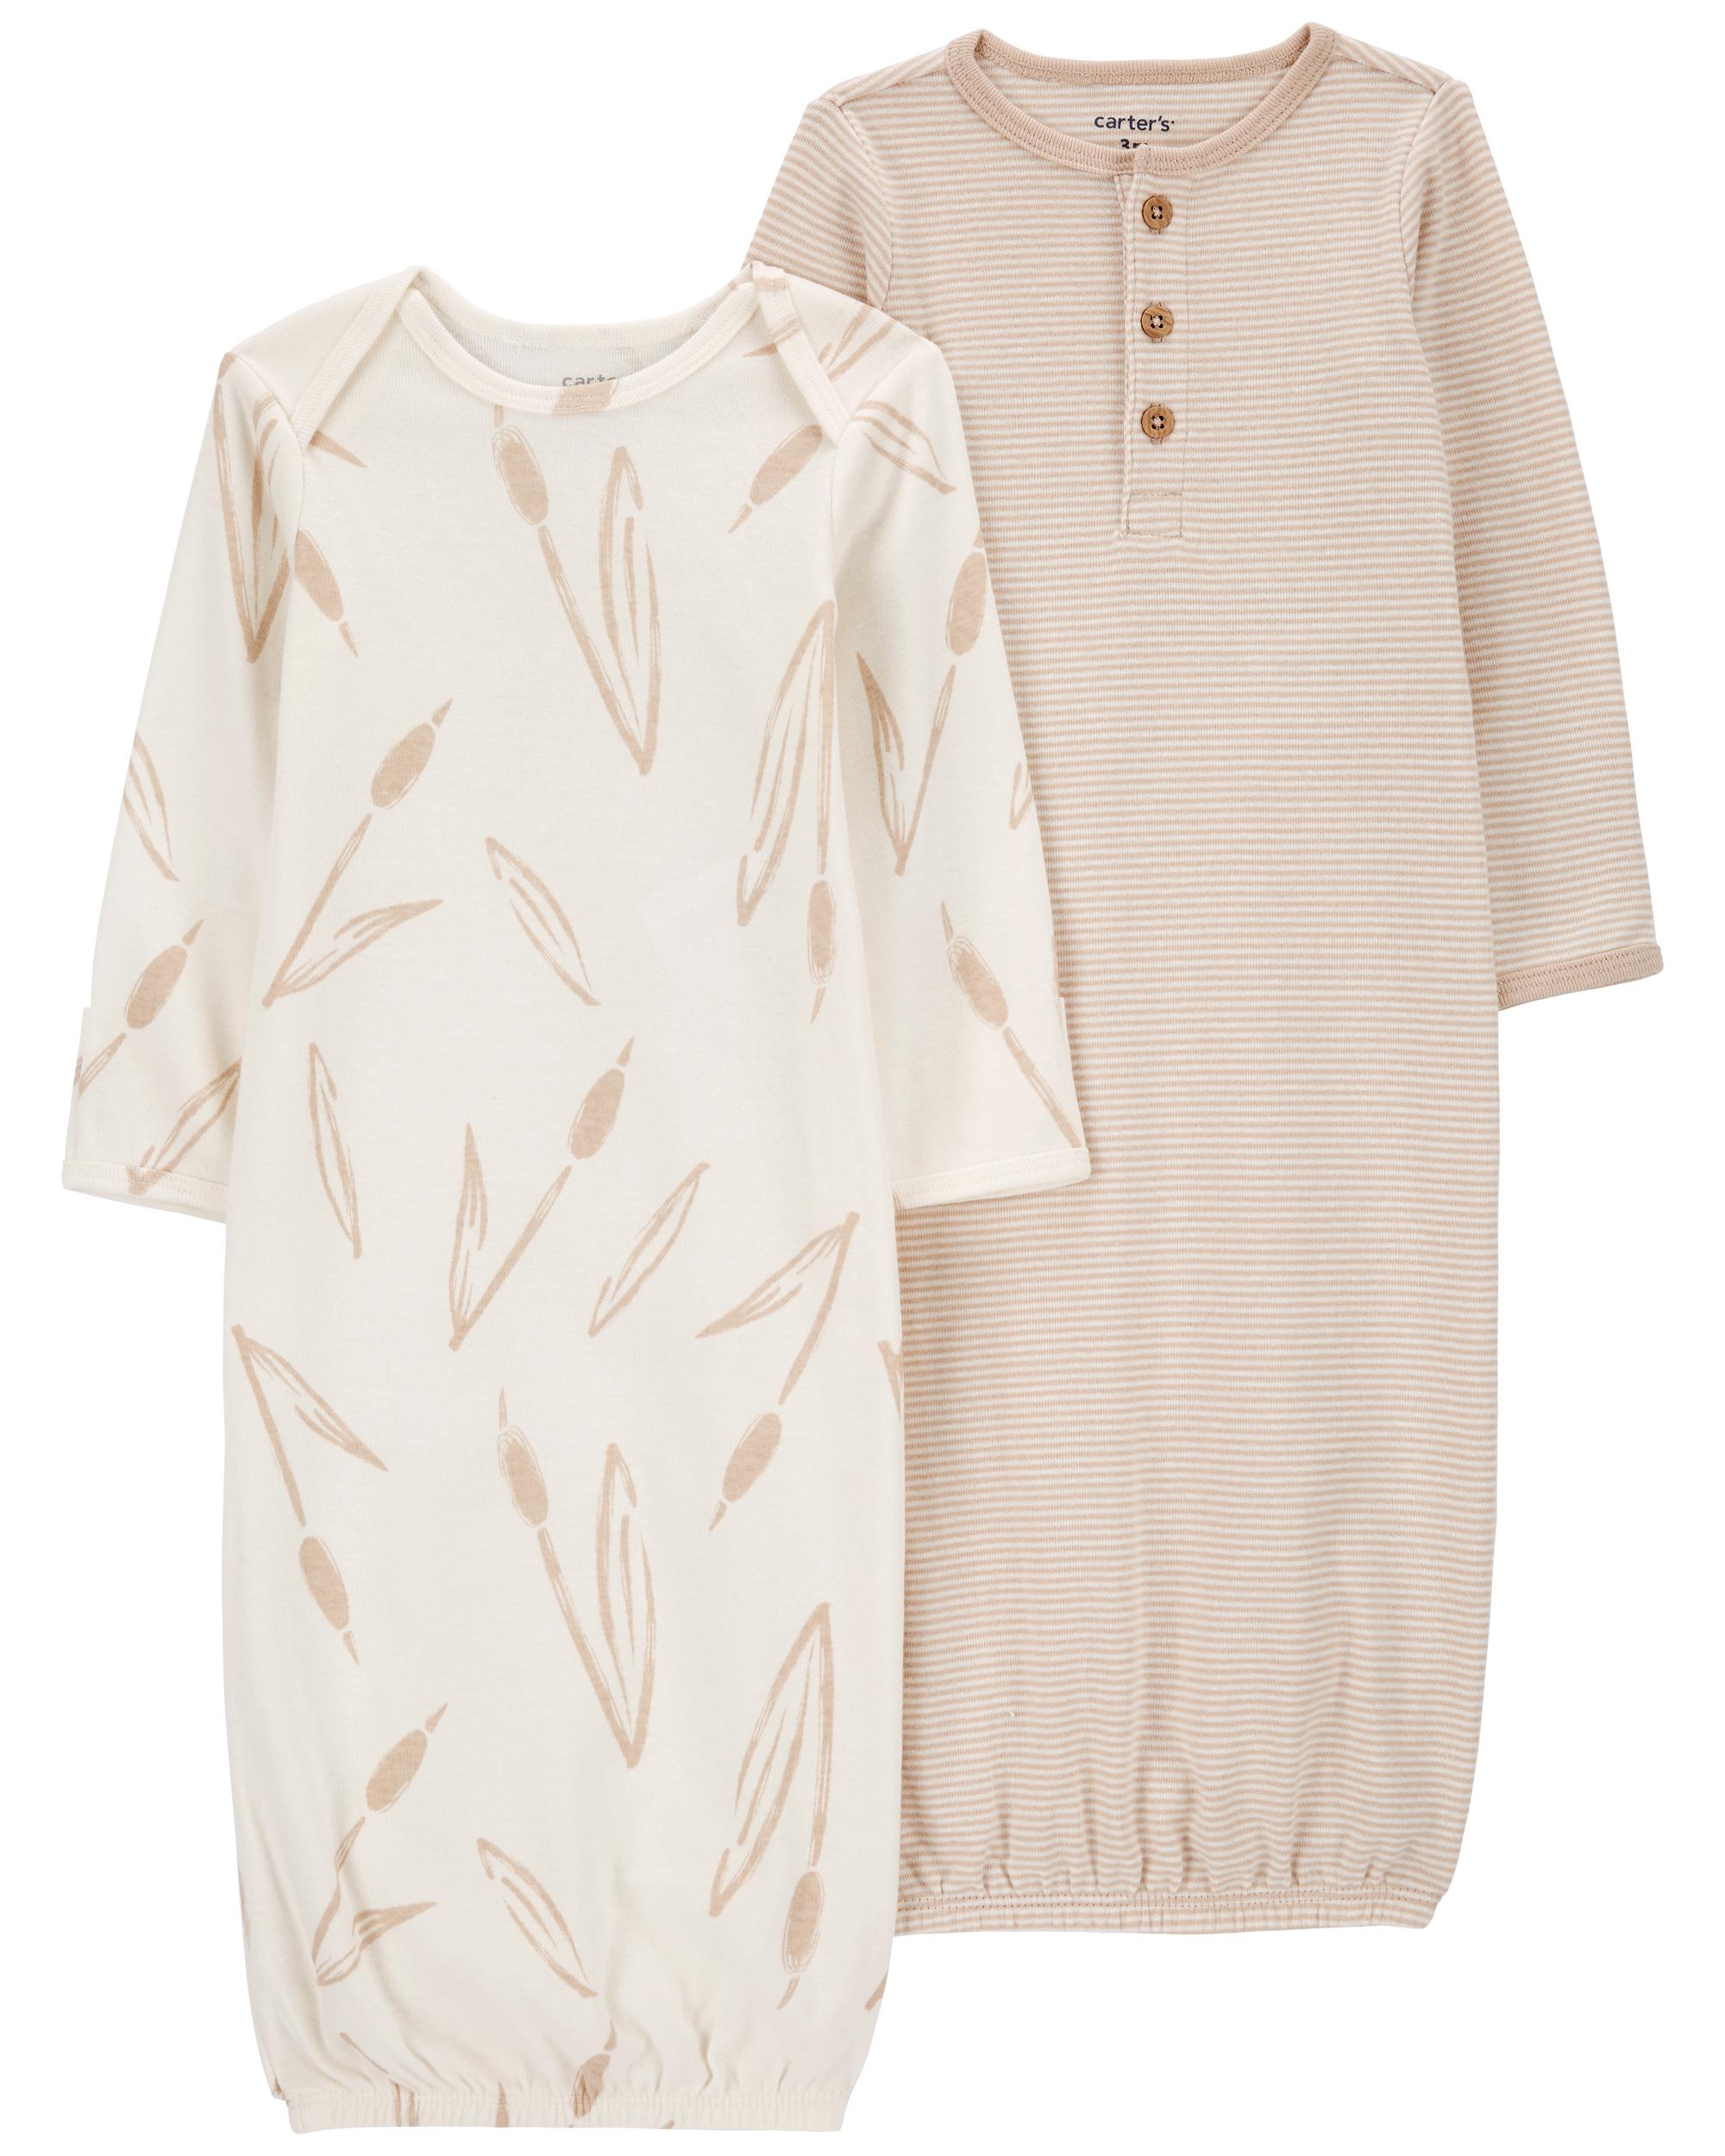 Carter's Carters Baby Boy or Girl 2-Pack Sleeper Gowns - Macy's